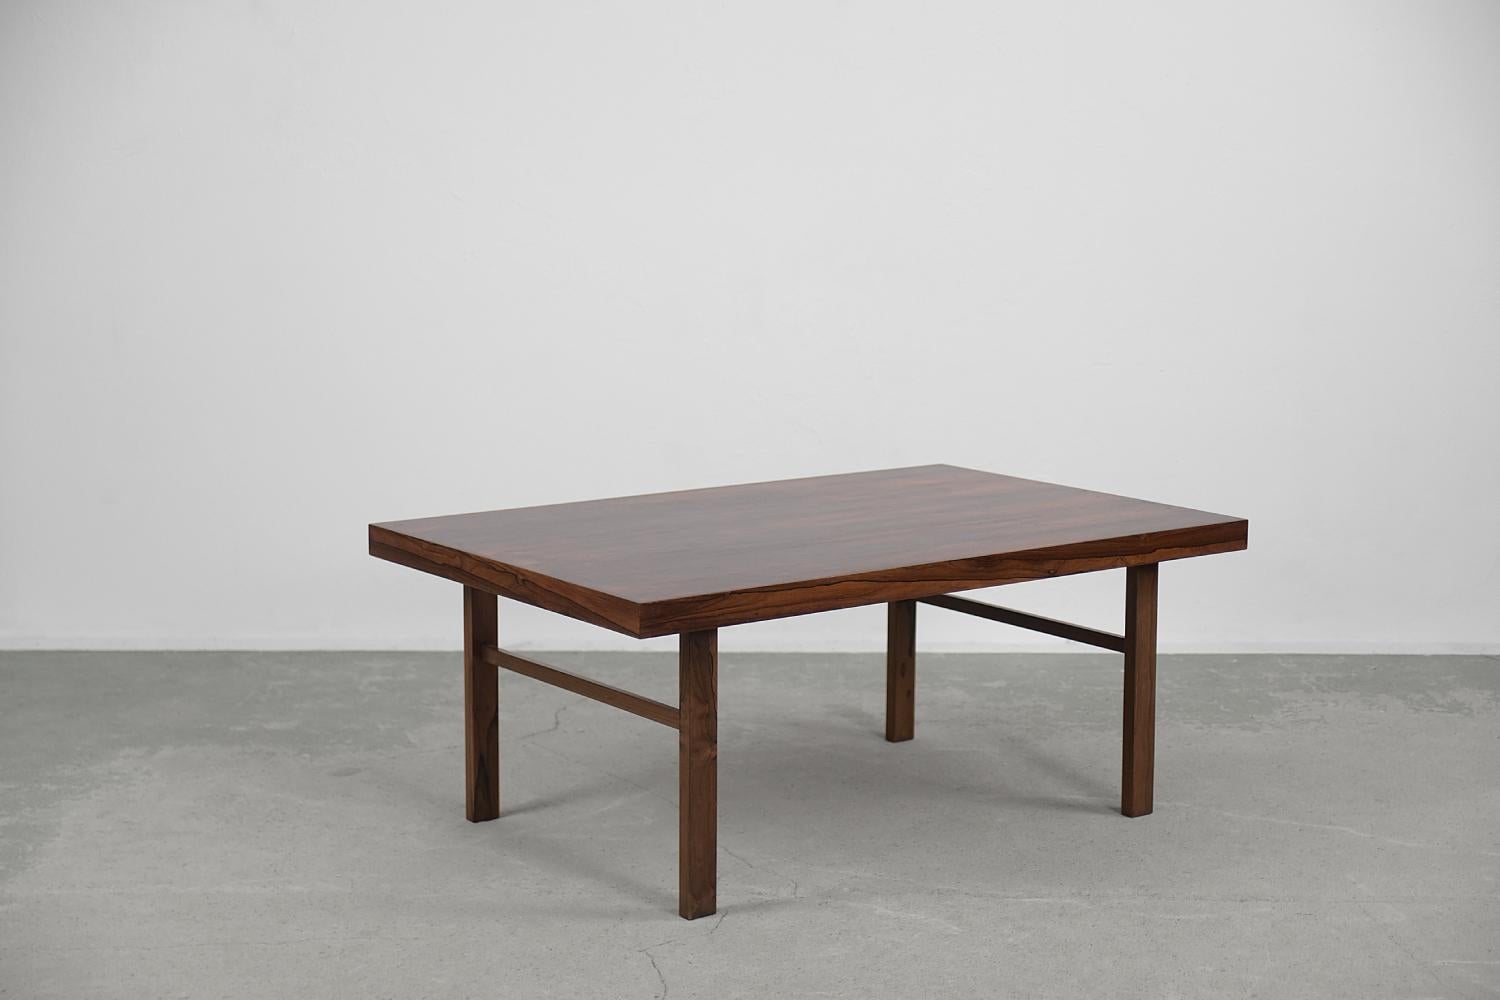 This classic coffee table comes from Brazil, where it was produced during the 1960s. It was finished with a rosewood with a dark tone and strong, hard graining. The form of the table refers to the colonial style, which is synonymous with the class